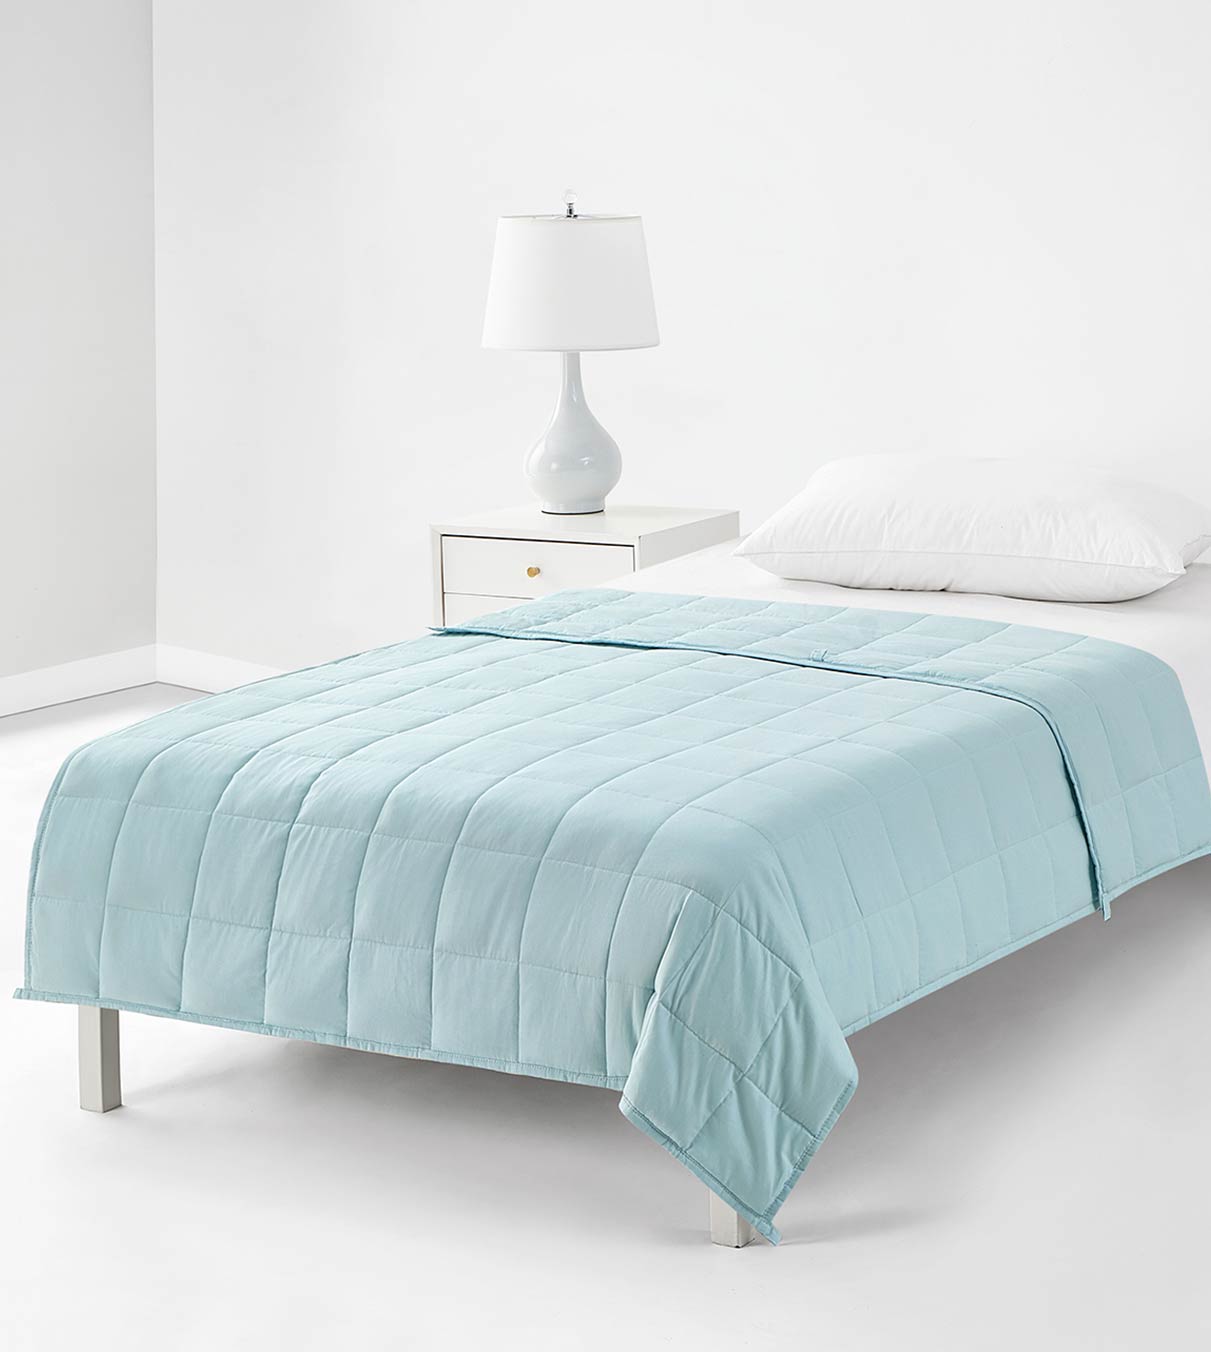 Product: Original Cotton Weighted Blanket | Color: Light Blue